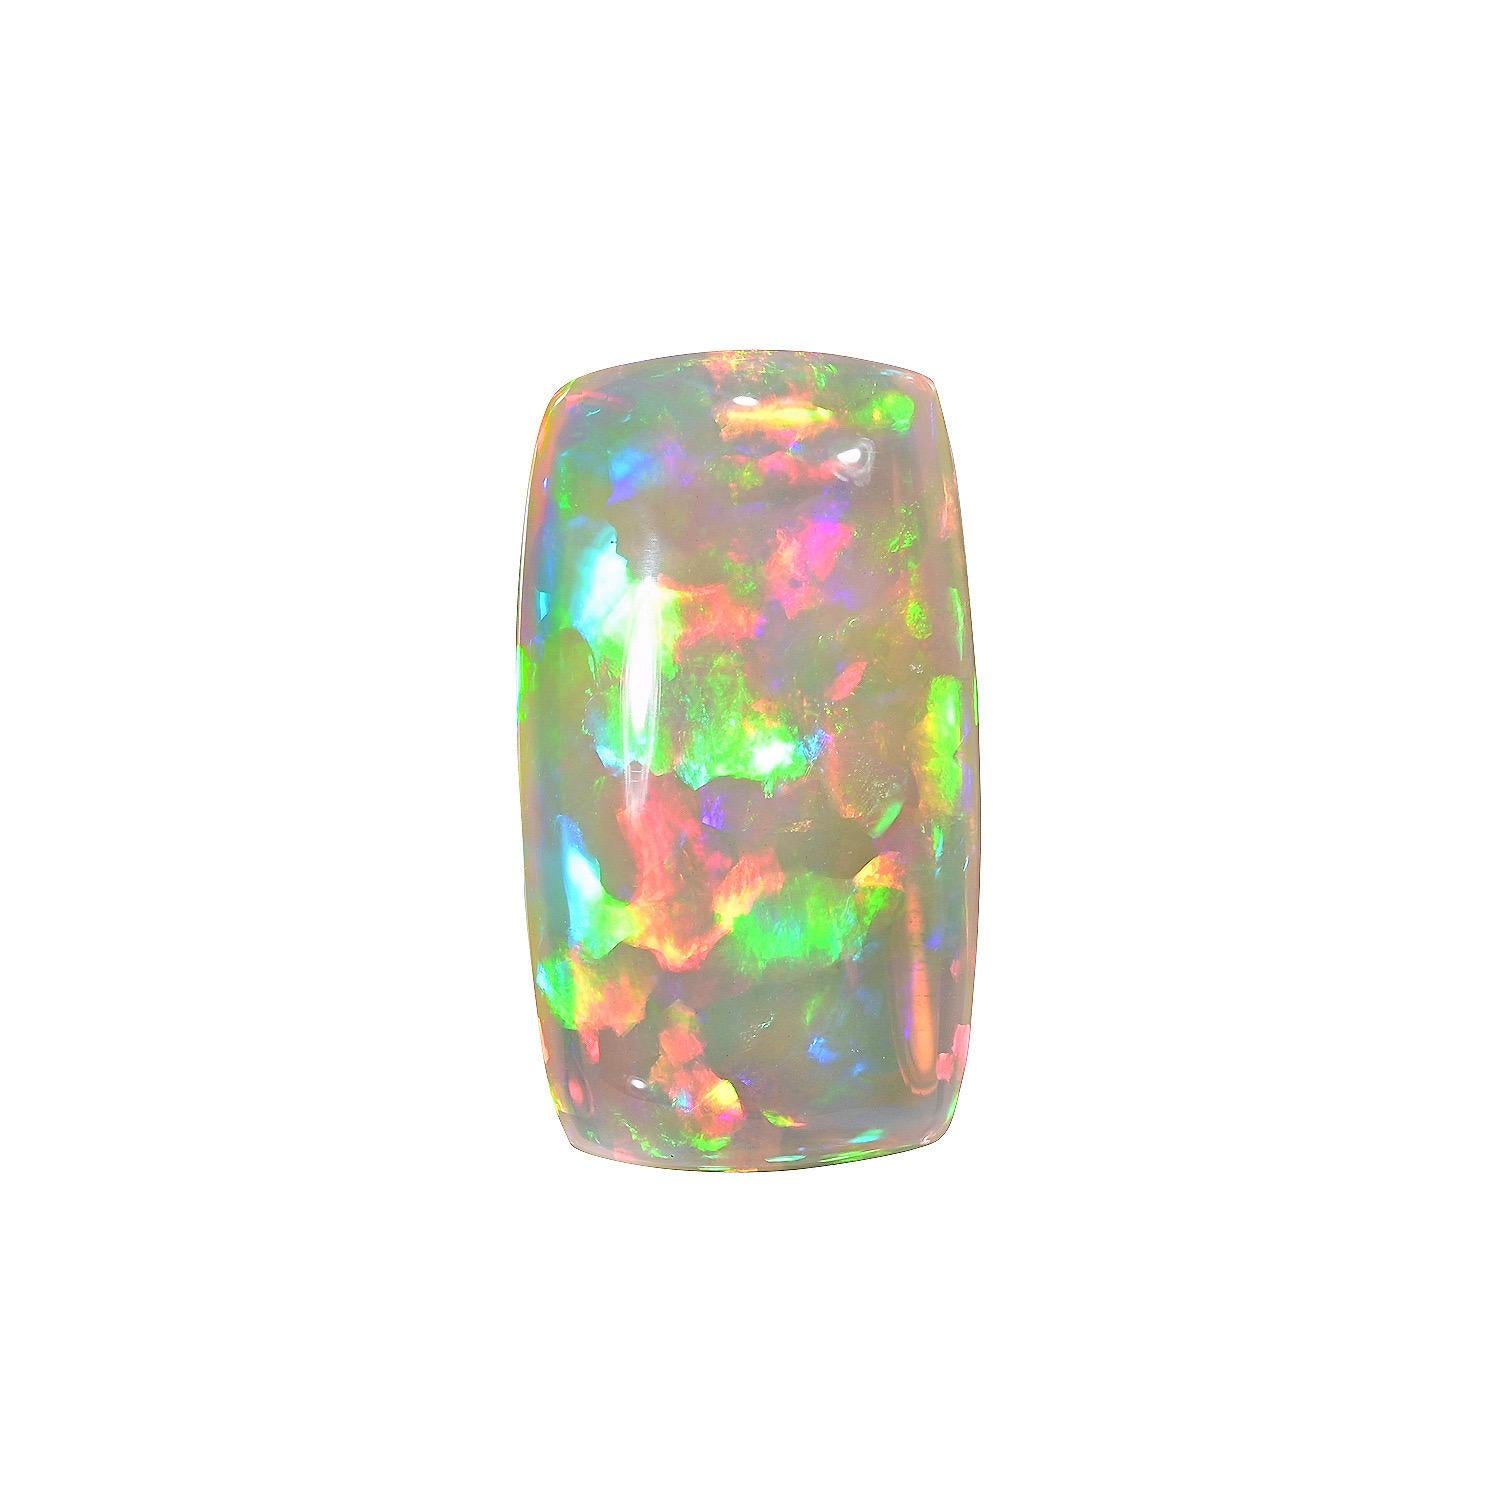 Natural 10.79 carat cushion Ethiopian Opal loose gemstone, offered unmounted to someone very special.
Returns are accepted and paid by us within 7 days of delivery.
We offer supreme custom jewelry work upon request. Please contact us for more